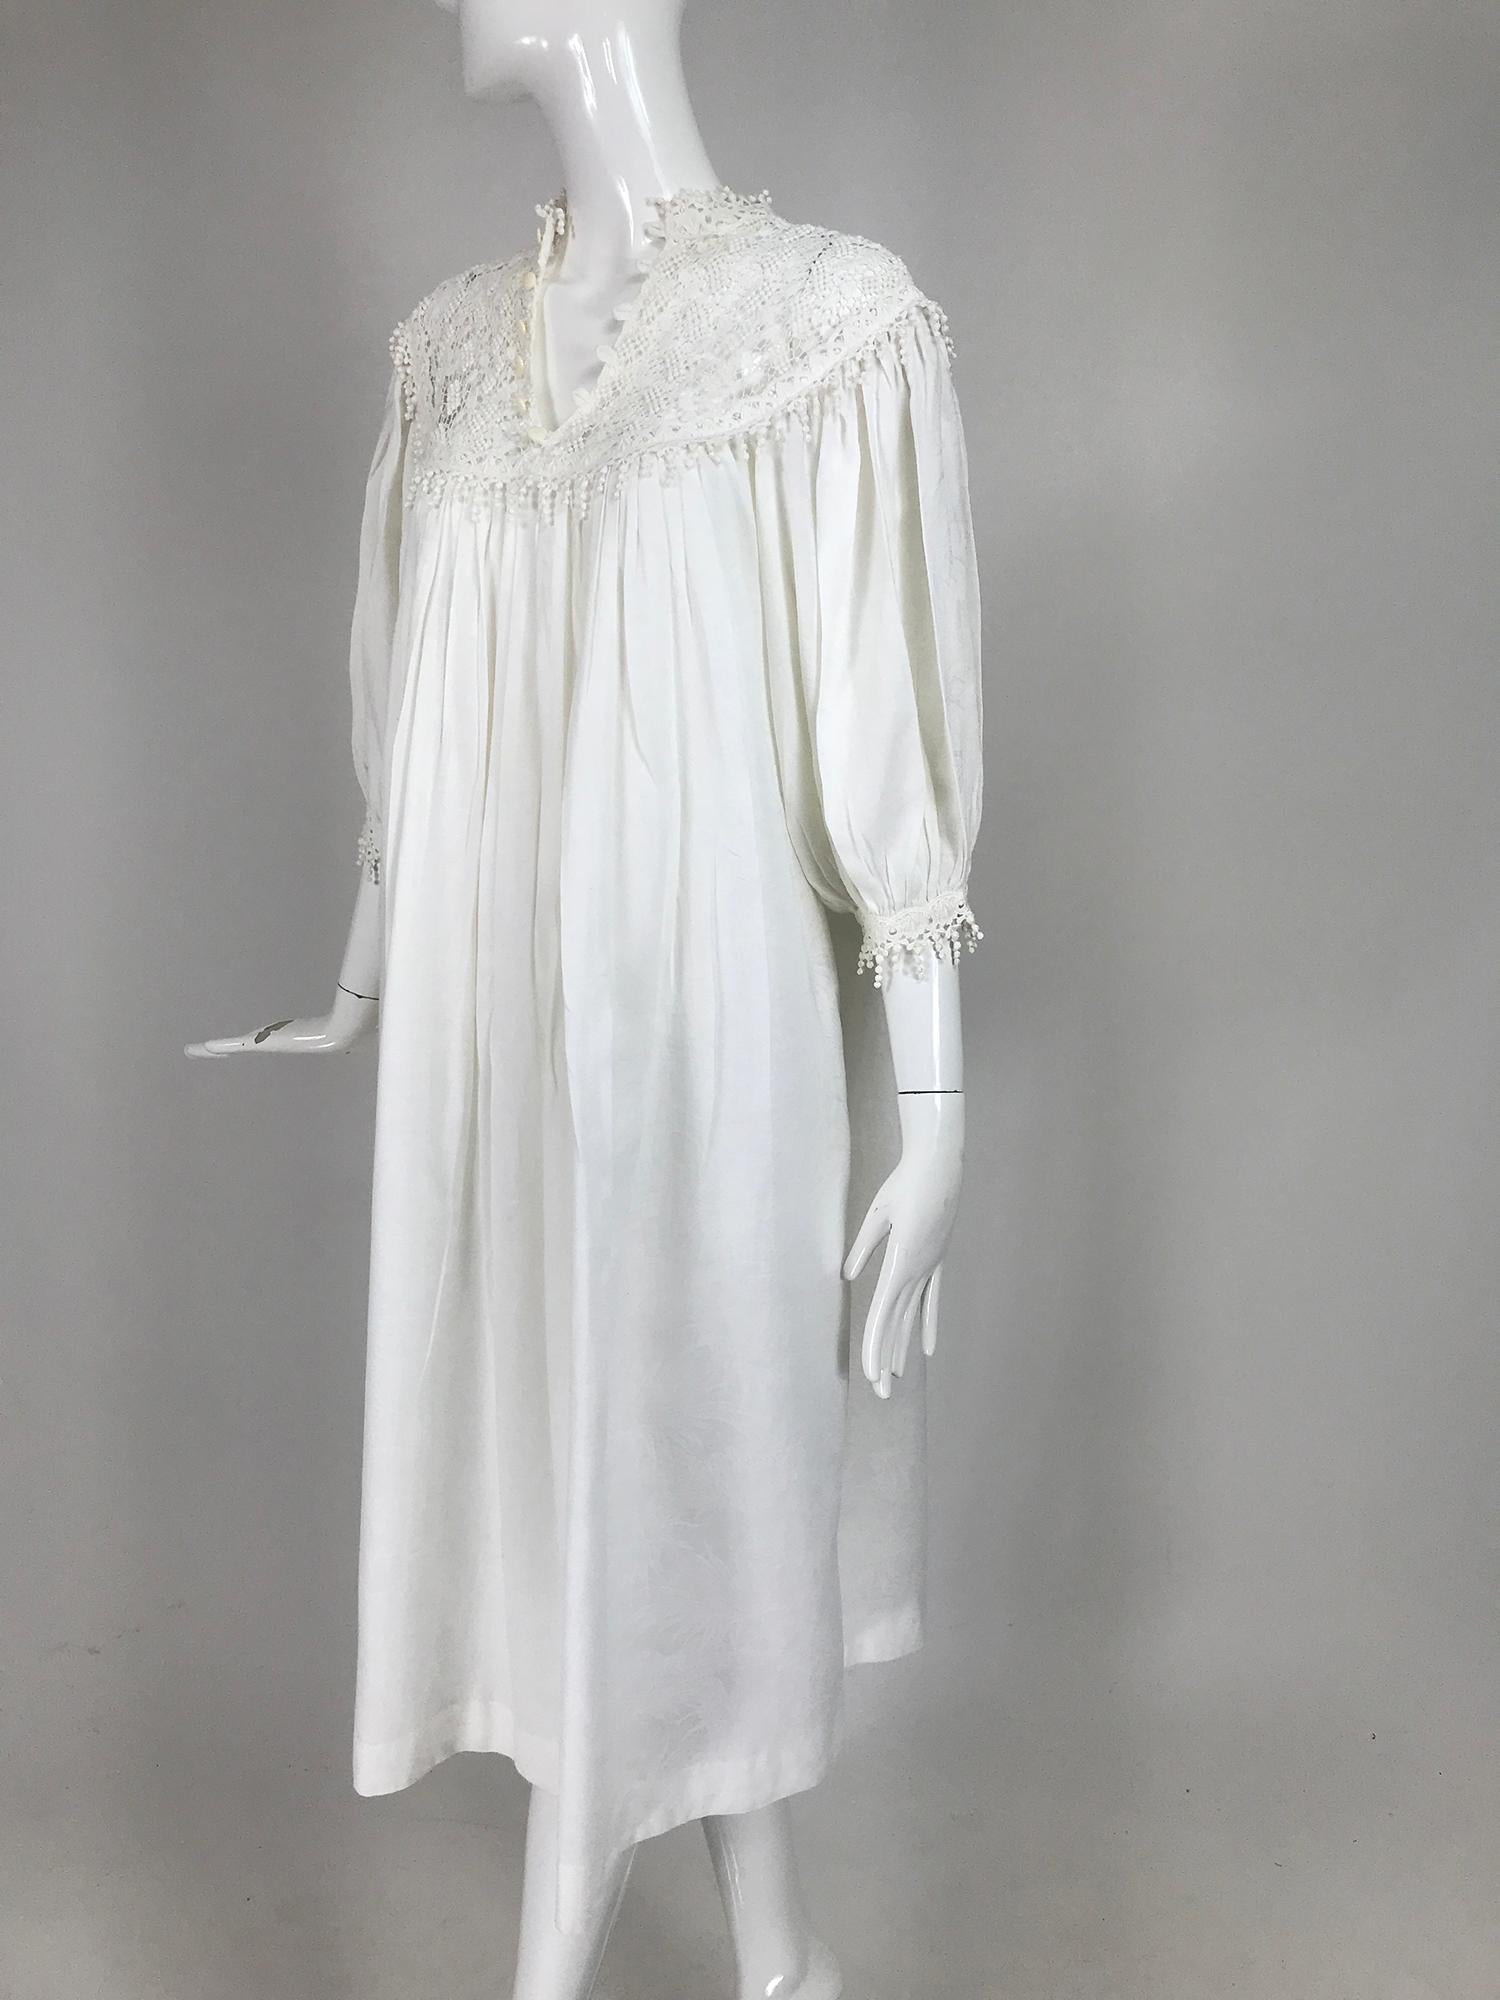 Vintage Chantal Thomass Ivory Crochet Yoke Damask Peasant Dress 1970s In Excellent Condition For Sale In West Palm Beach, FL